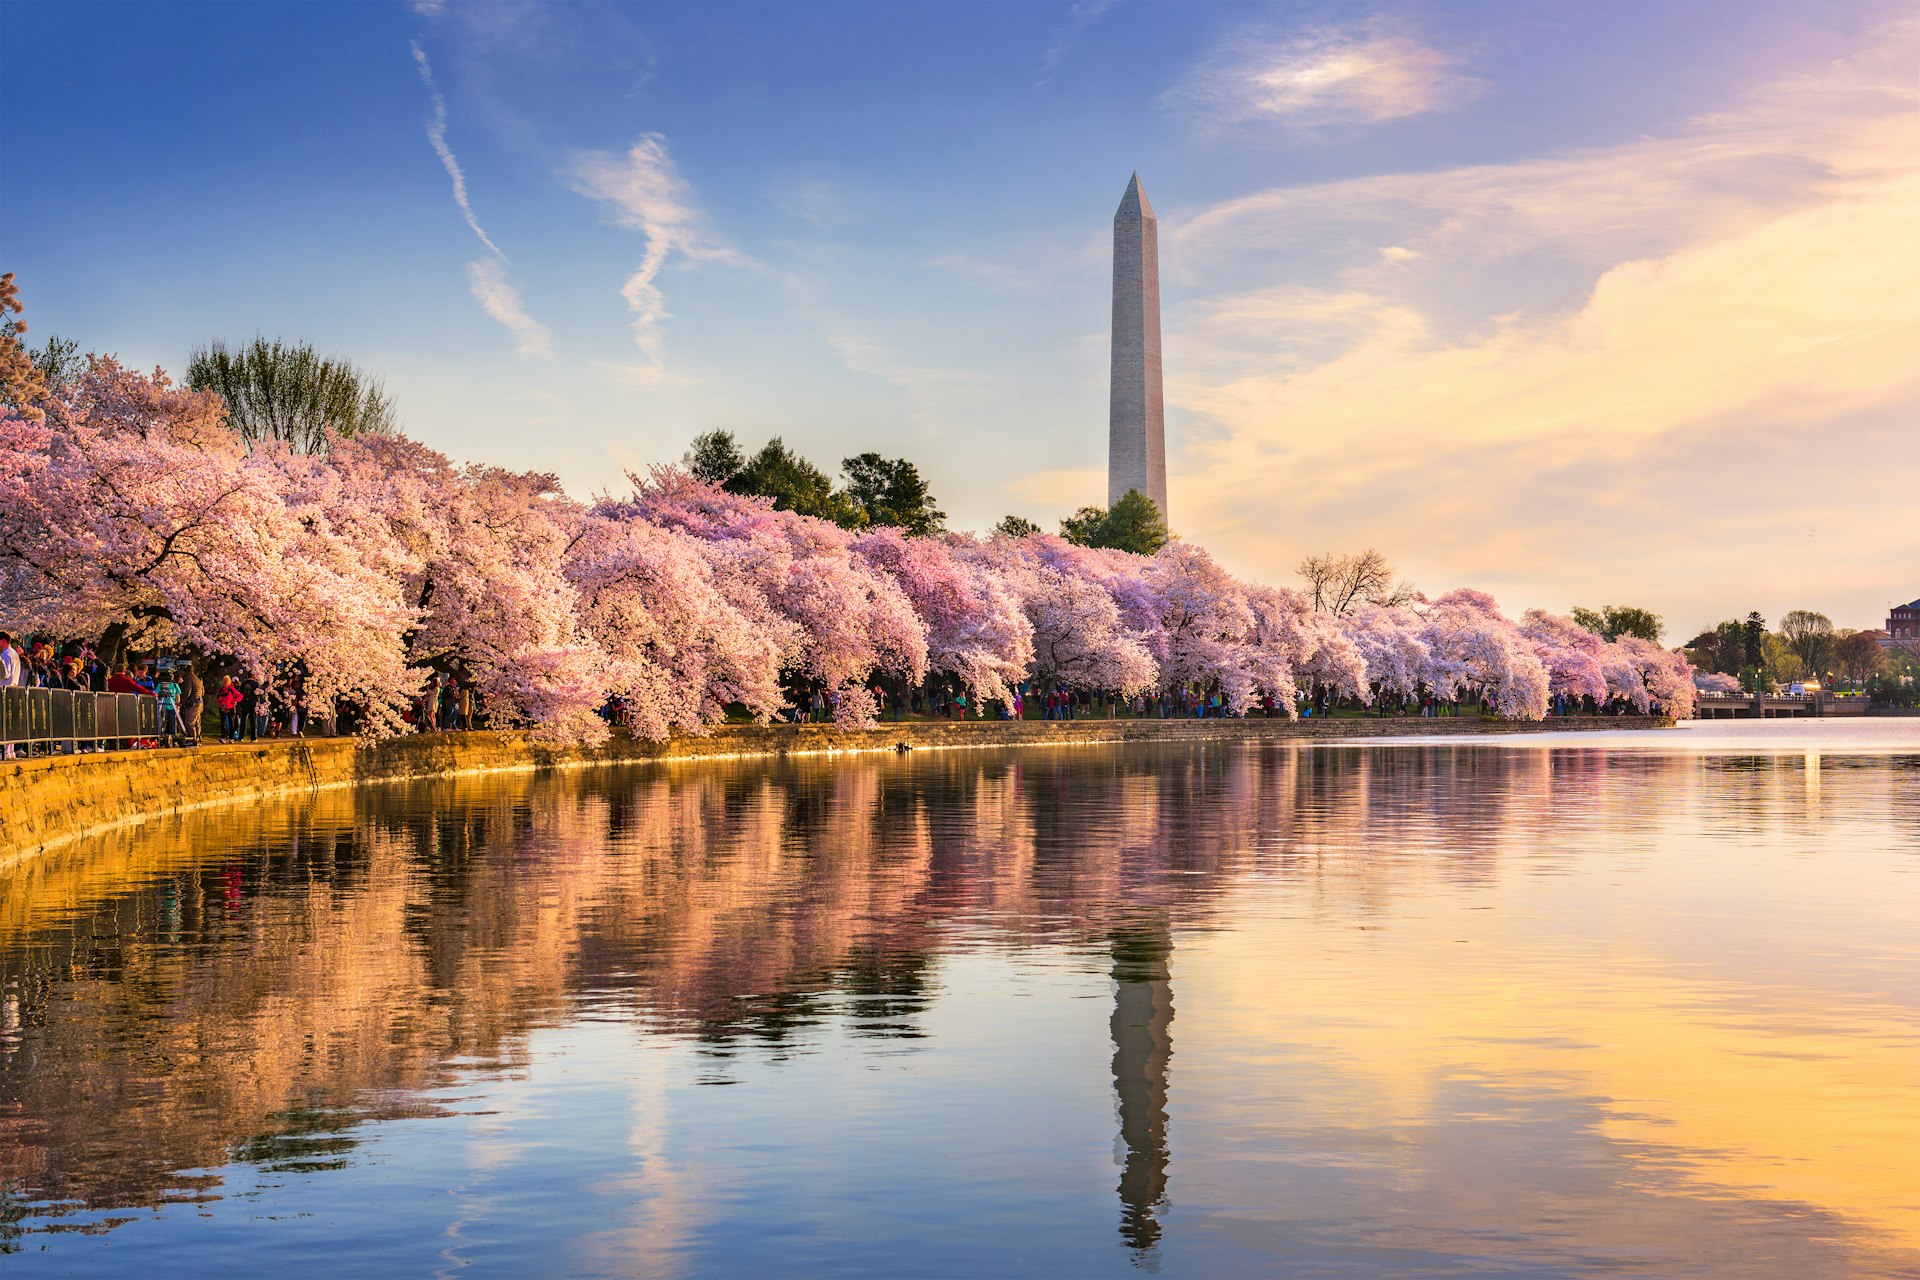 A body of water lined with cherry trees in full bloom. People admire their pink petals